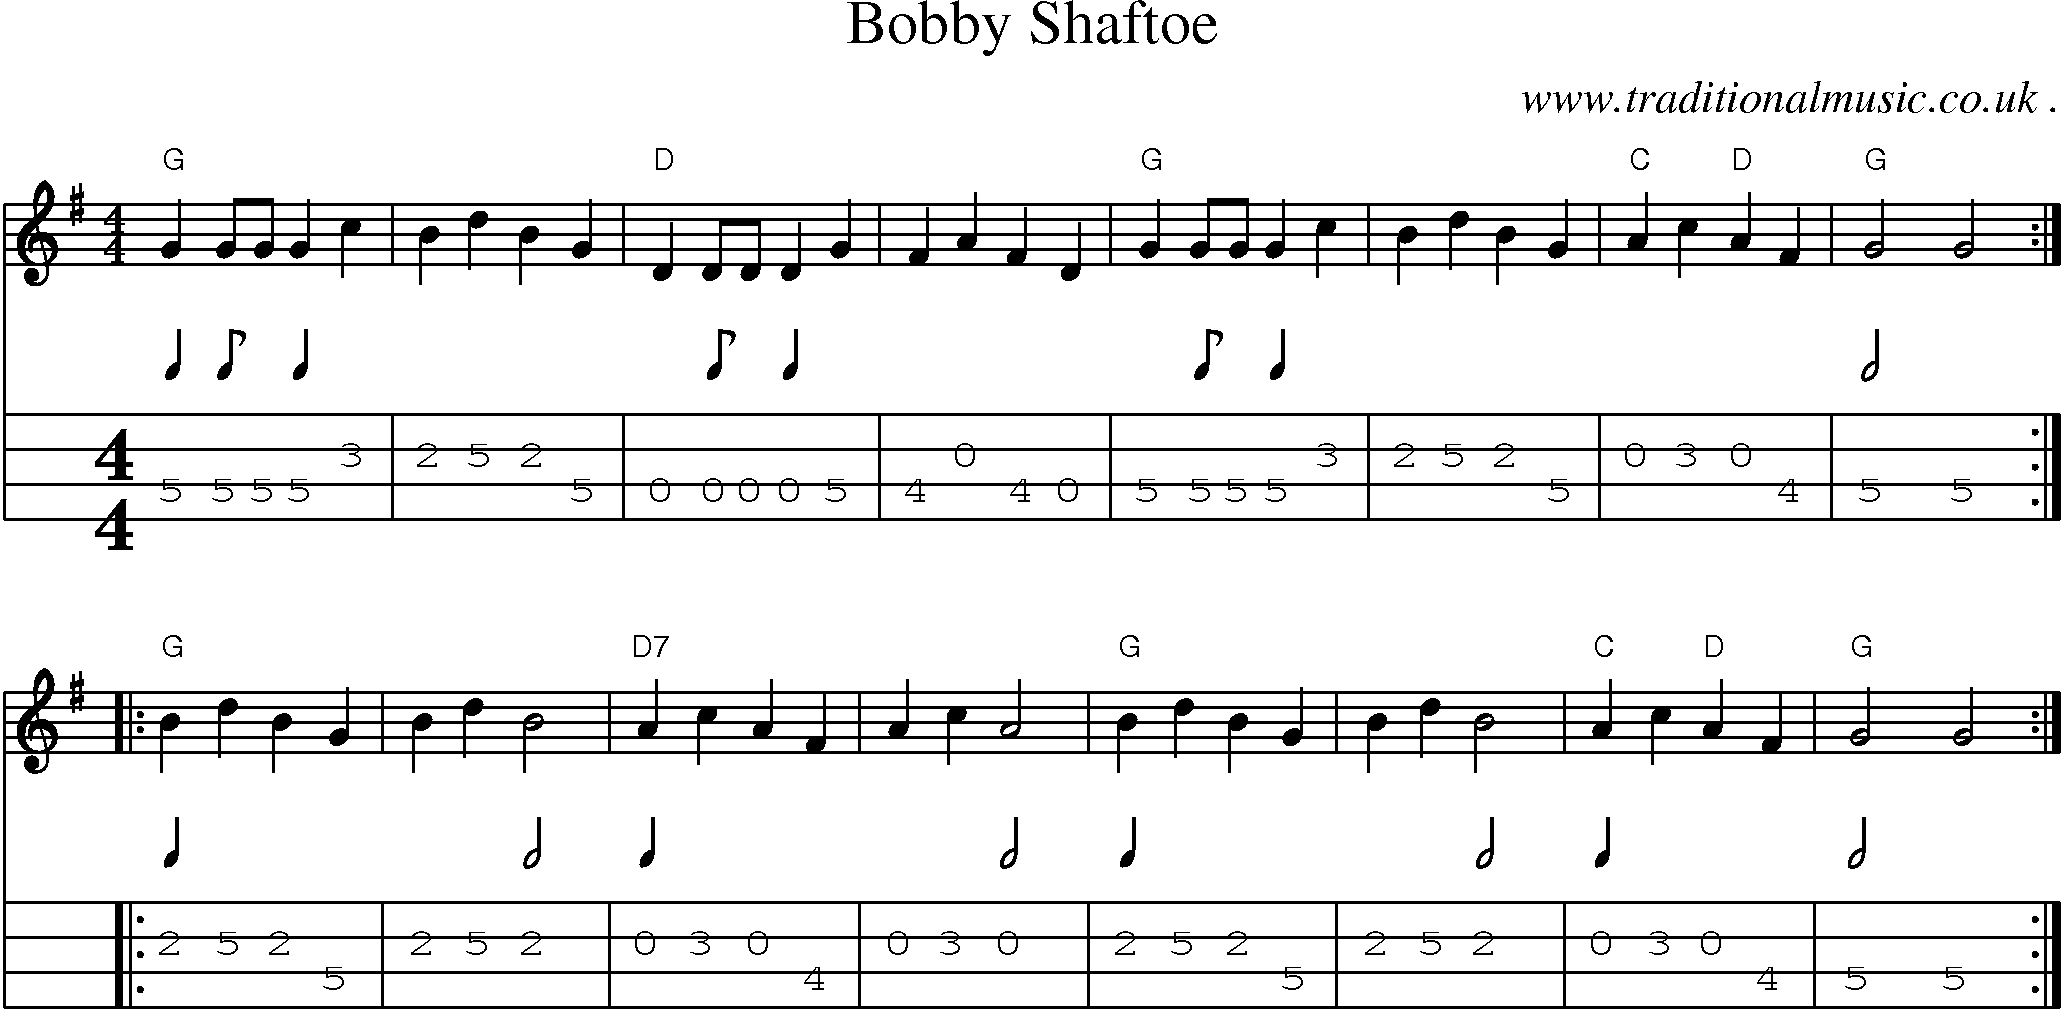 Music Score and Guitar Tabs for Bobby Shaftoe